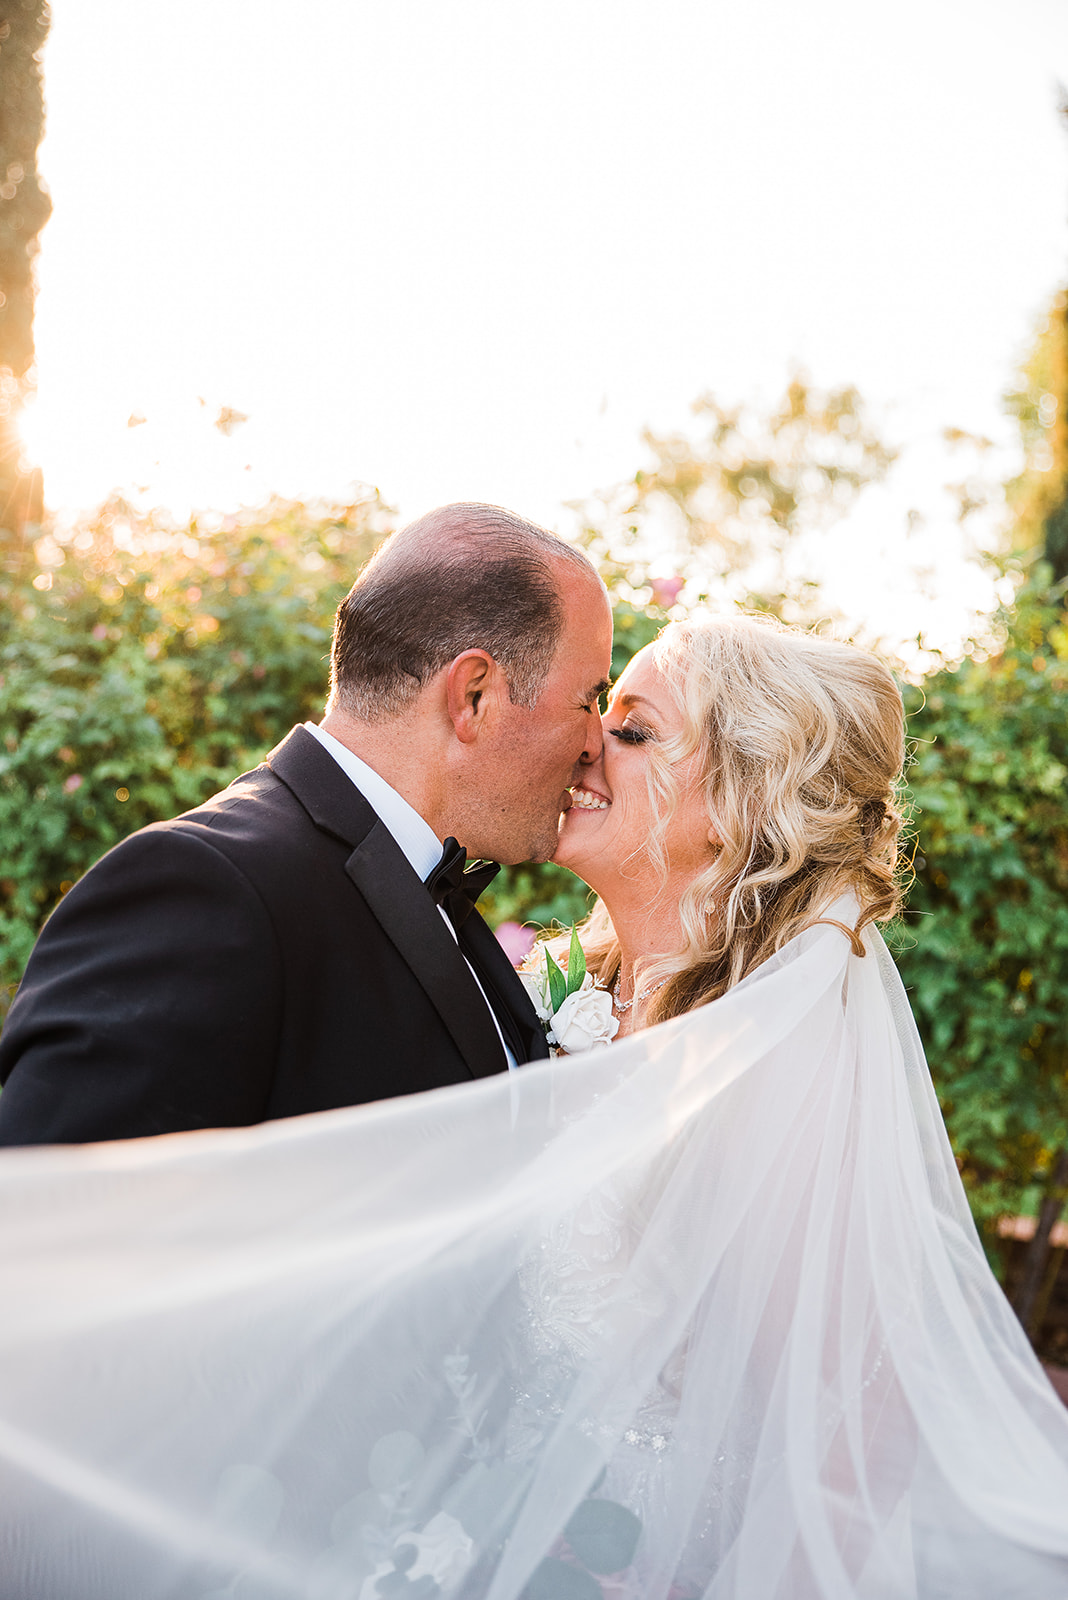 Newlyweds kiss while wrapped in the long veil in a garden at sunset during their Regency Garden Wedding